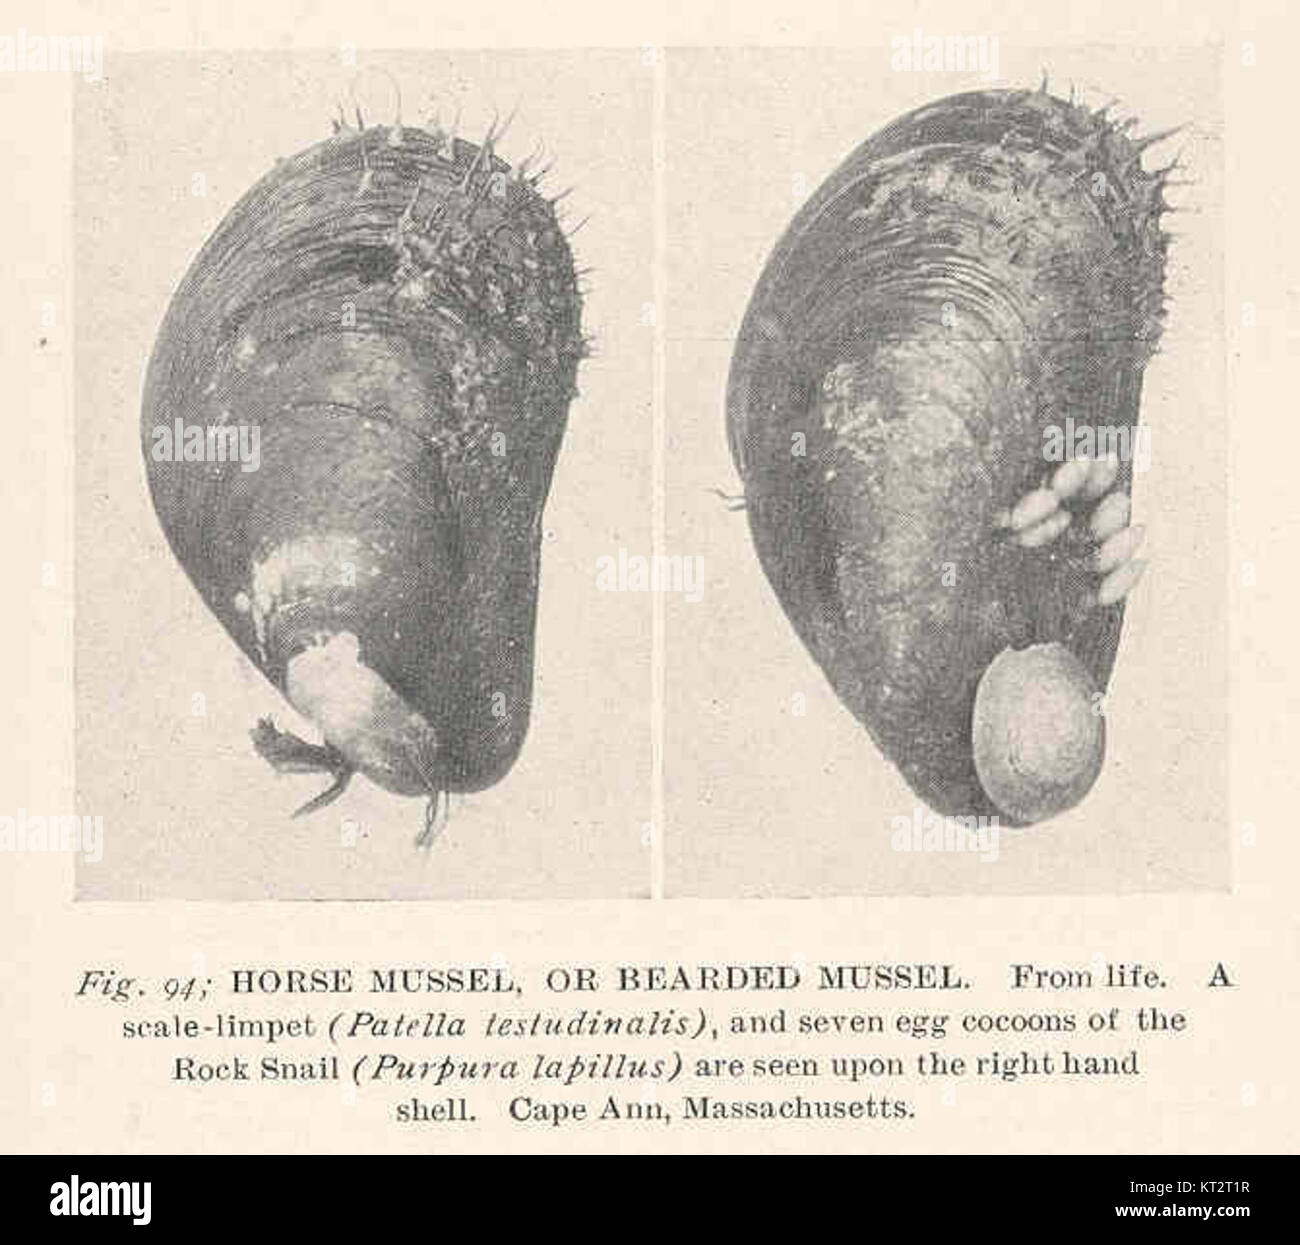 38582 Horse Mussel or Bearded Mussel From Life A Scale-limpet (Patella testudinalis) and seven egg cocoons of the Rock Snail (Purpura Stock Photo